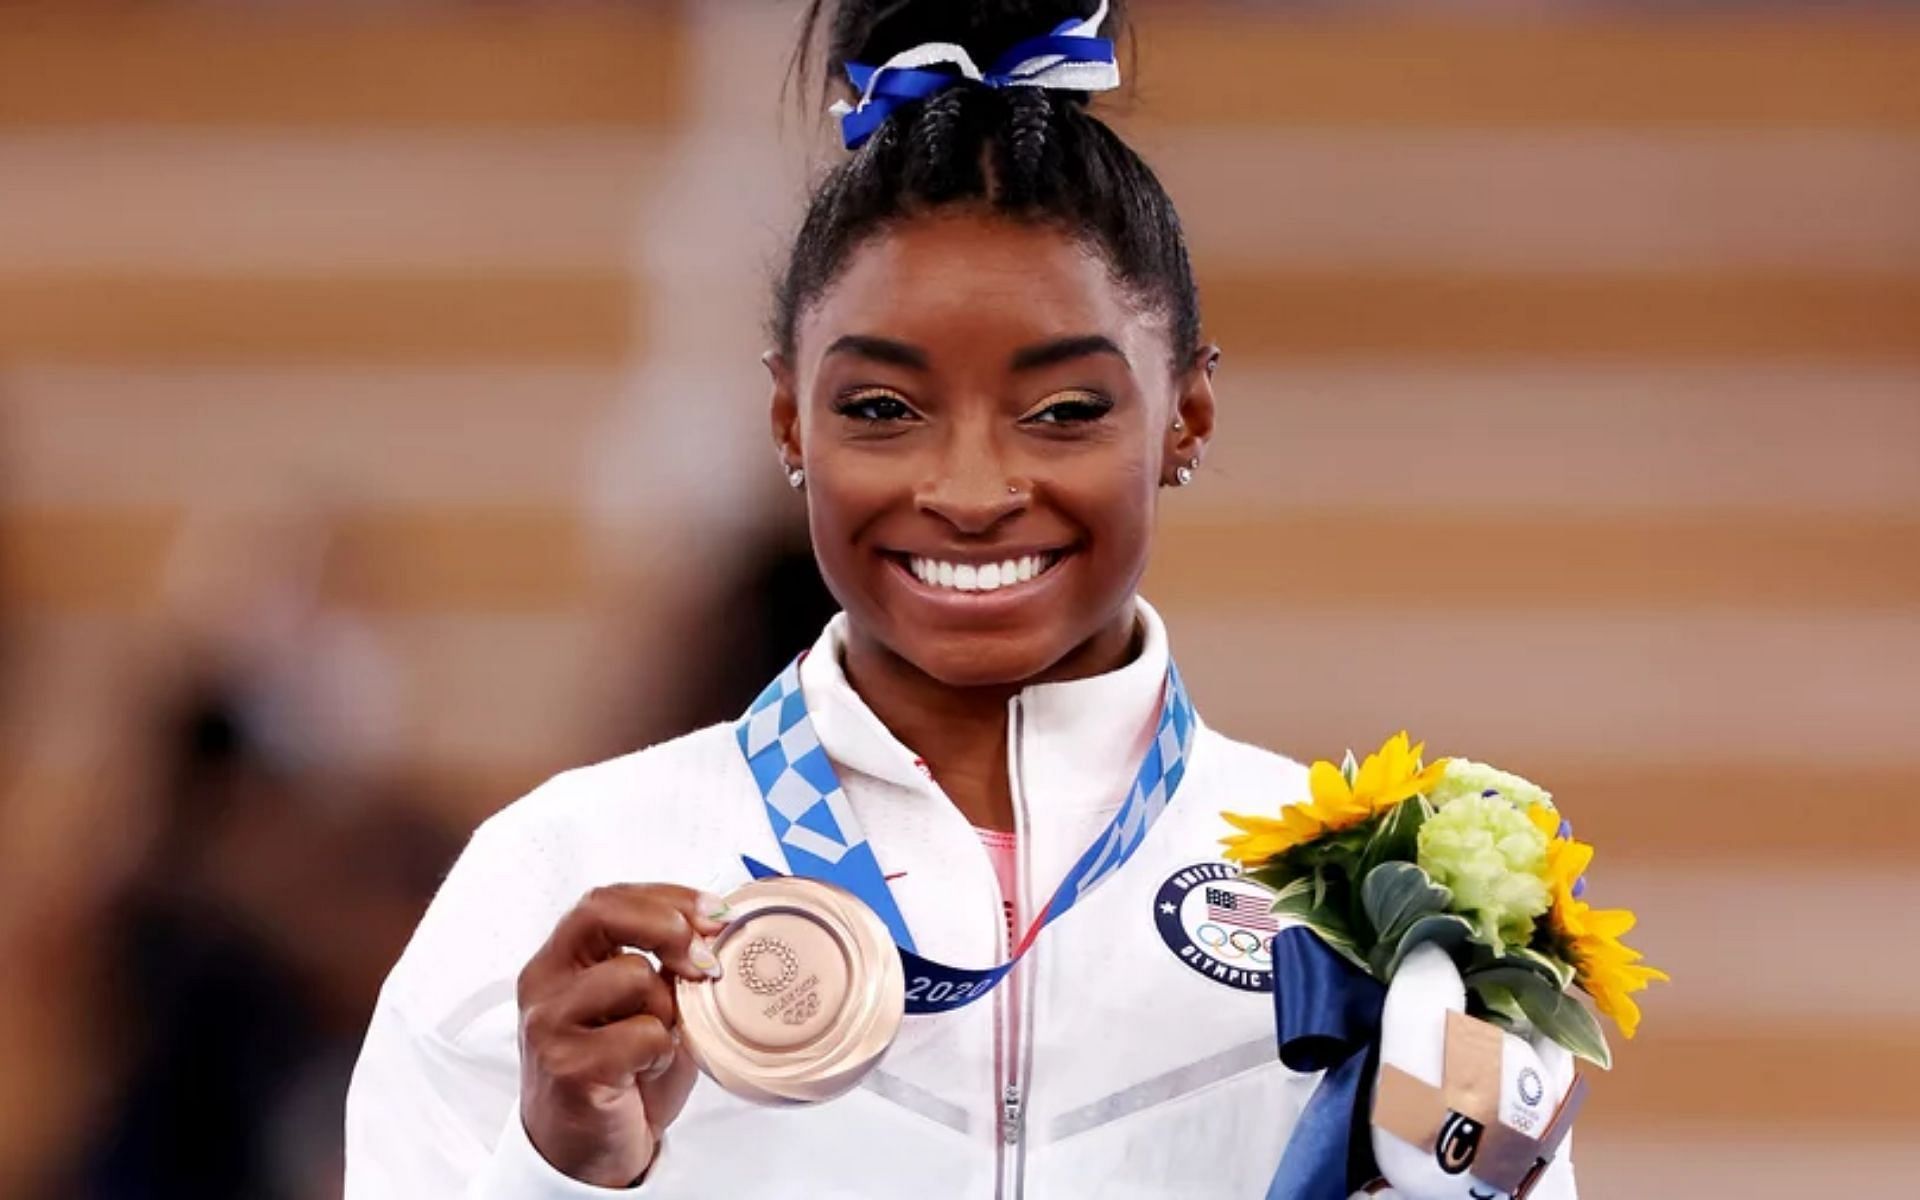 Simone Biles at the 2020 Summer Olympics that was held at Tokyo in 2021 (Image via Getty Images)